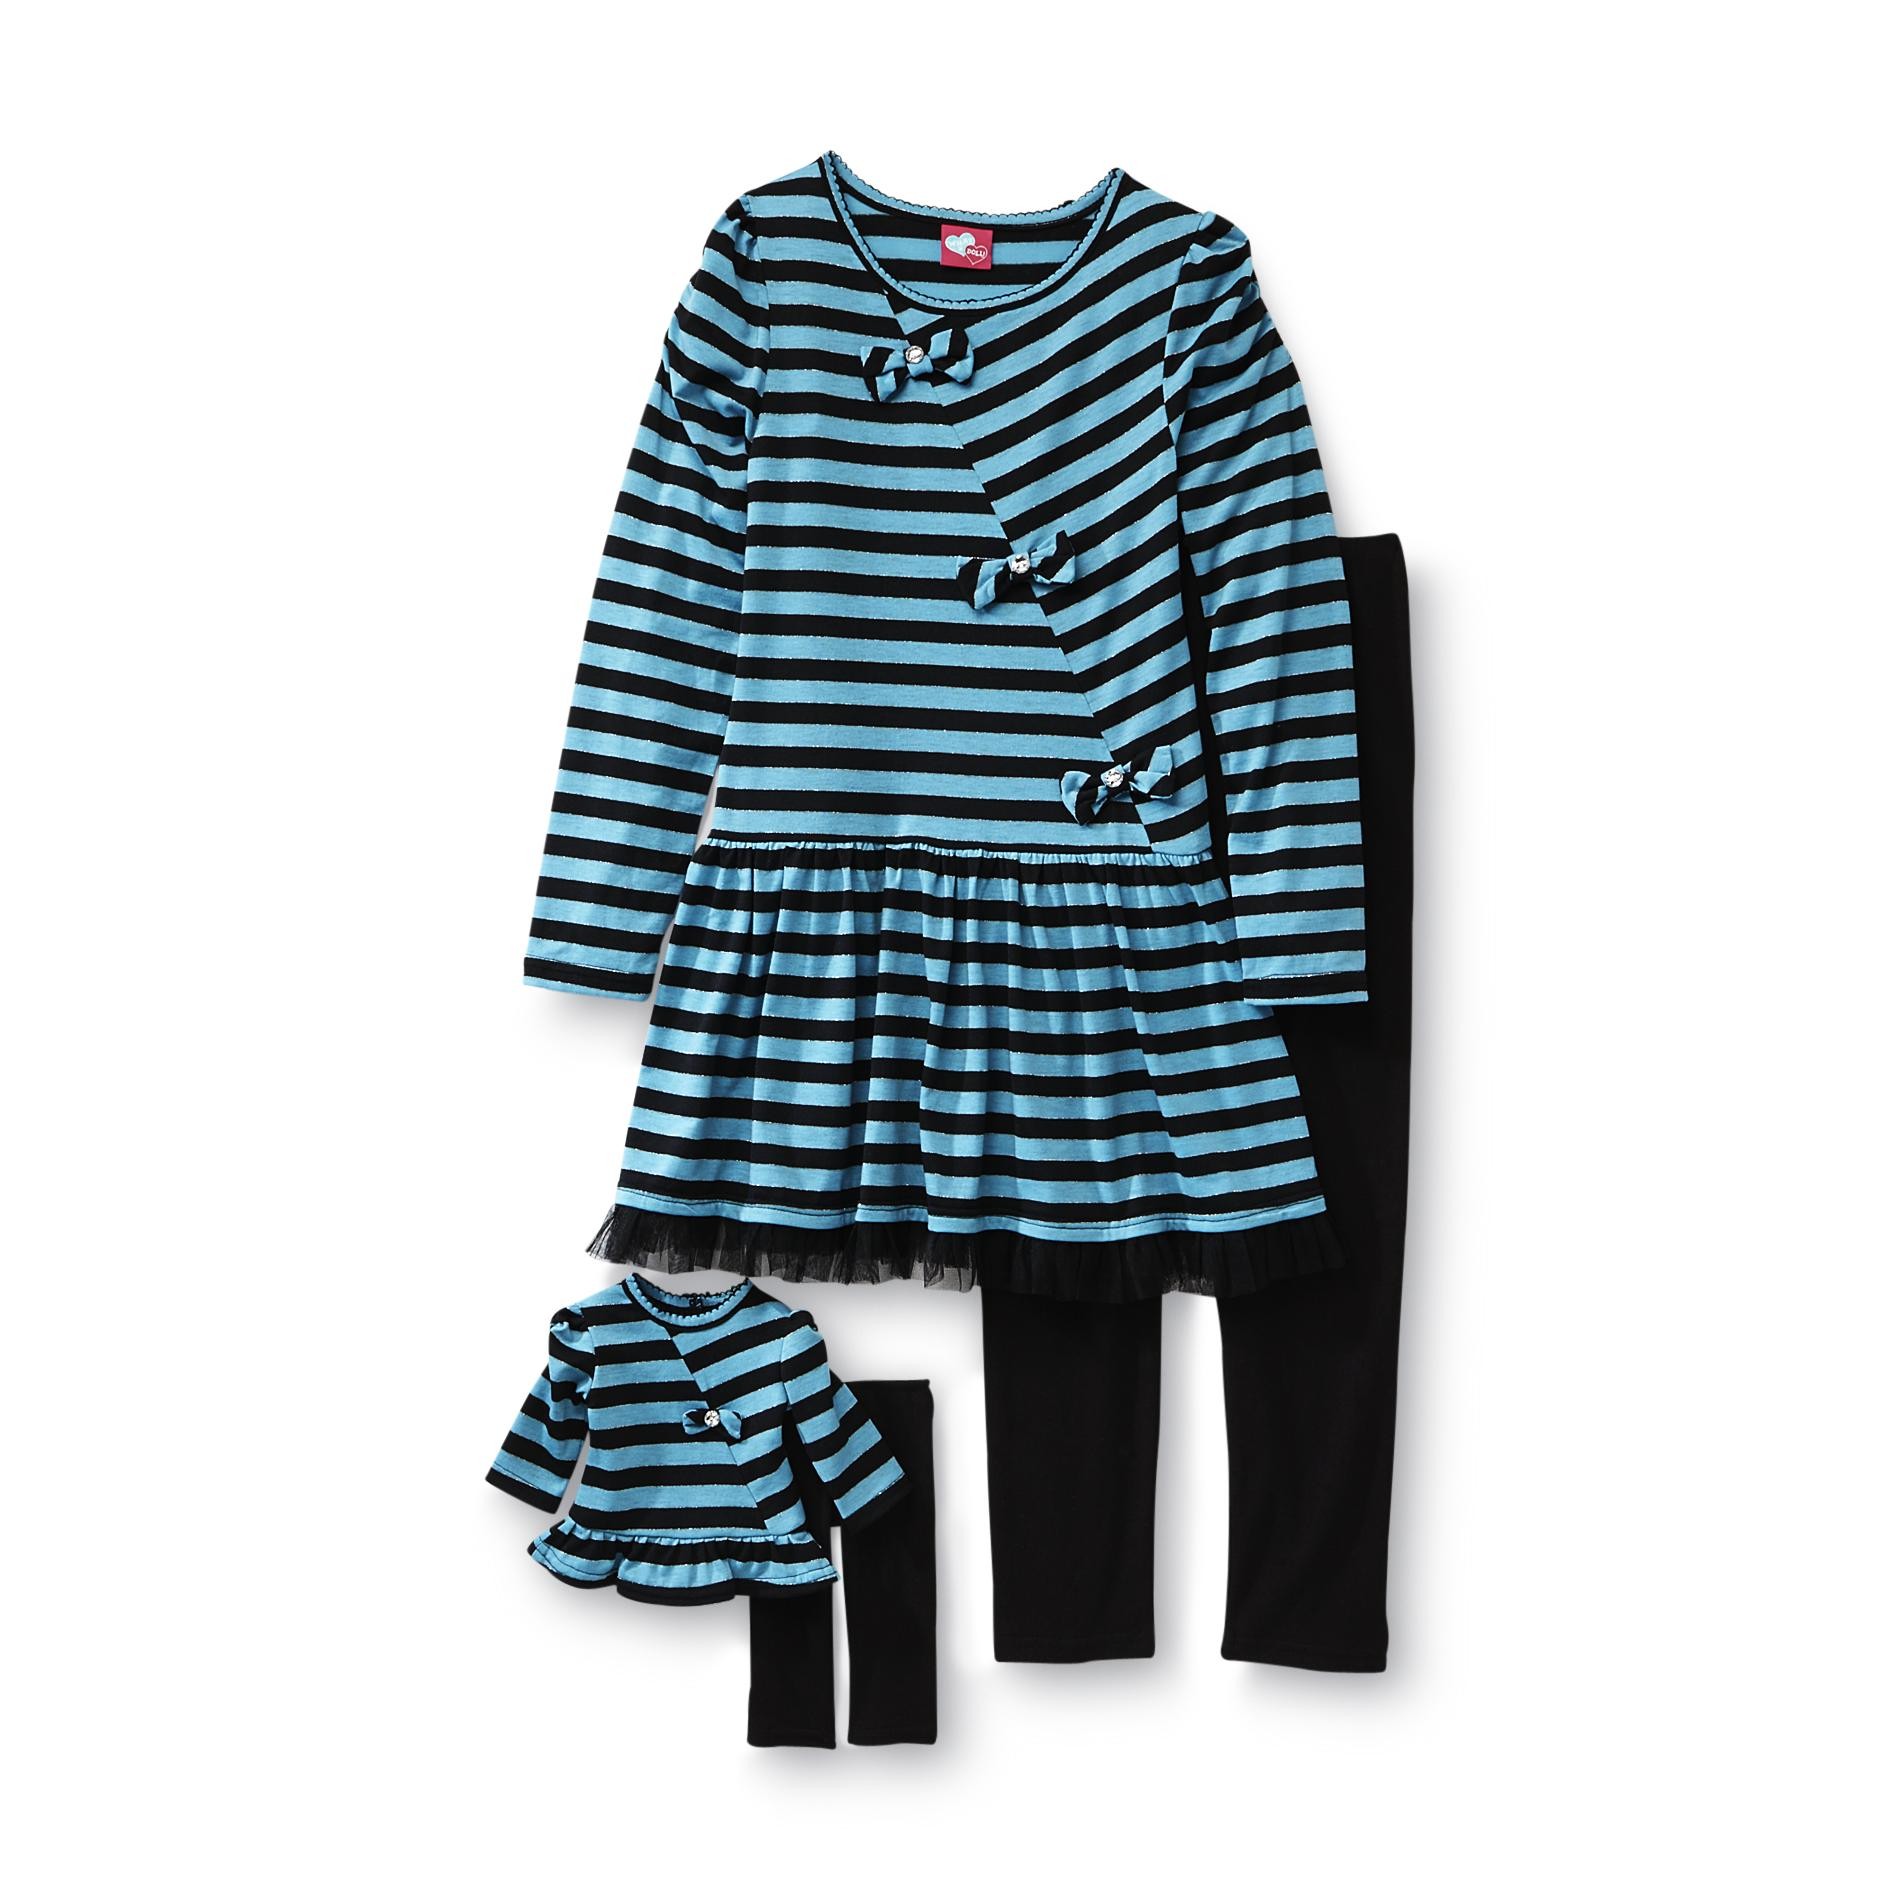 What A Doll Girl's Tunic  Leggings & Doll Outfit - Metallic Striped